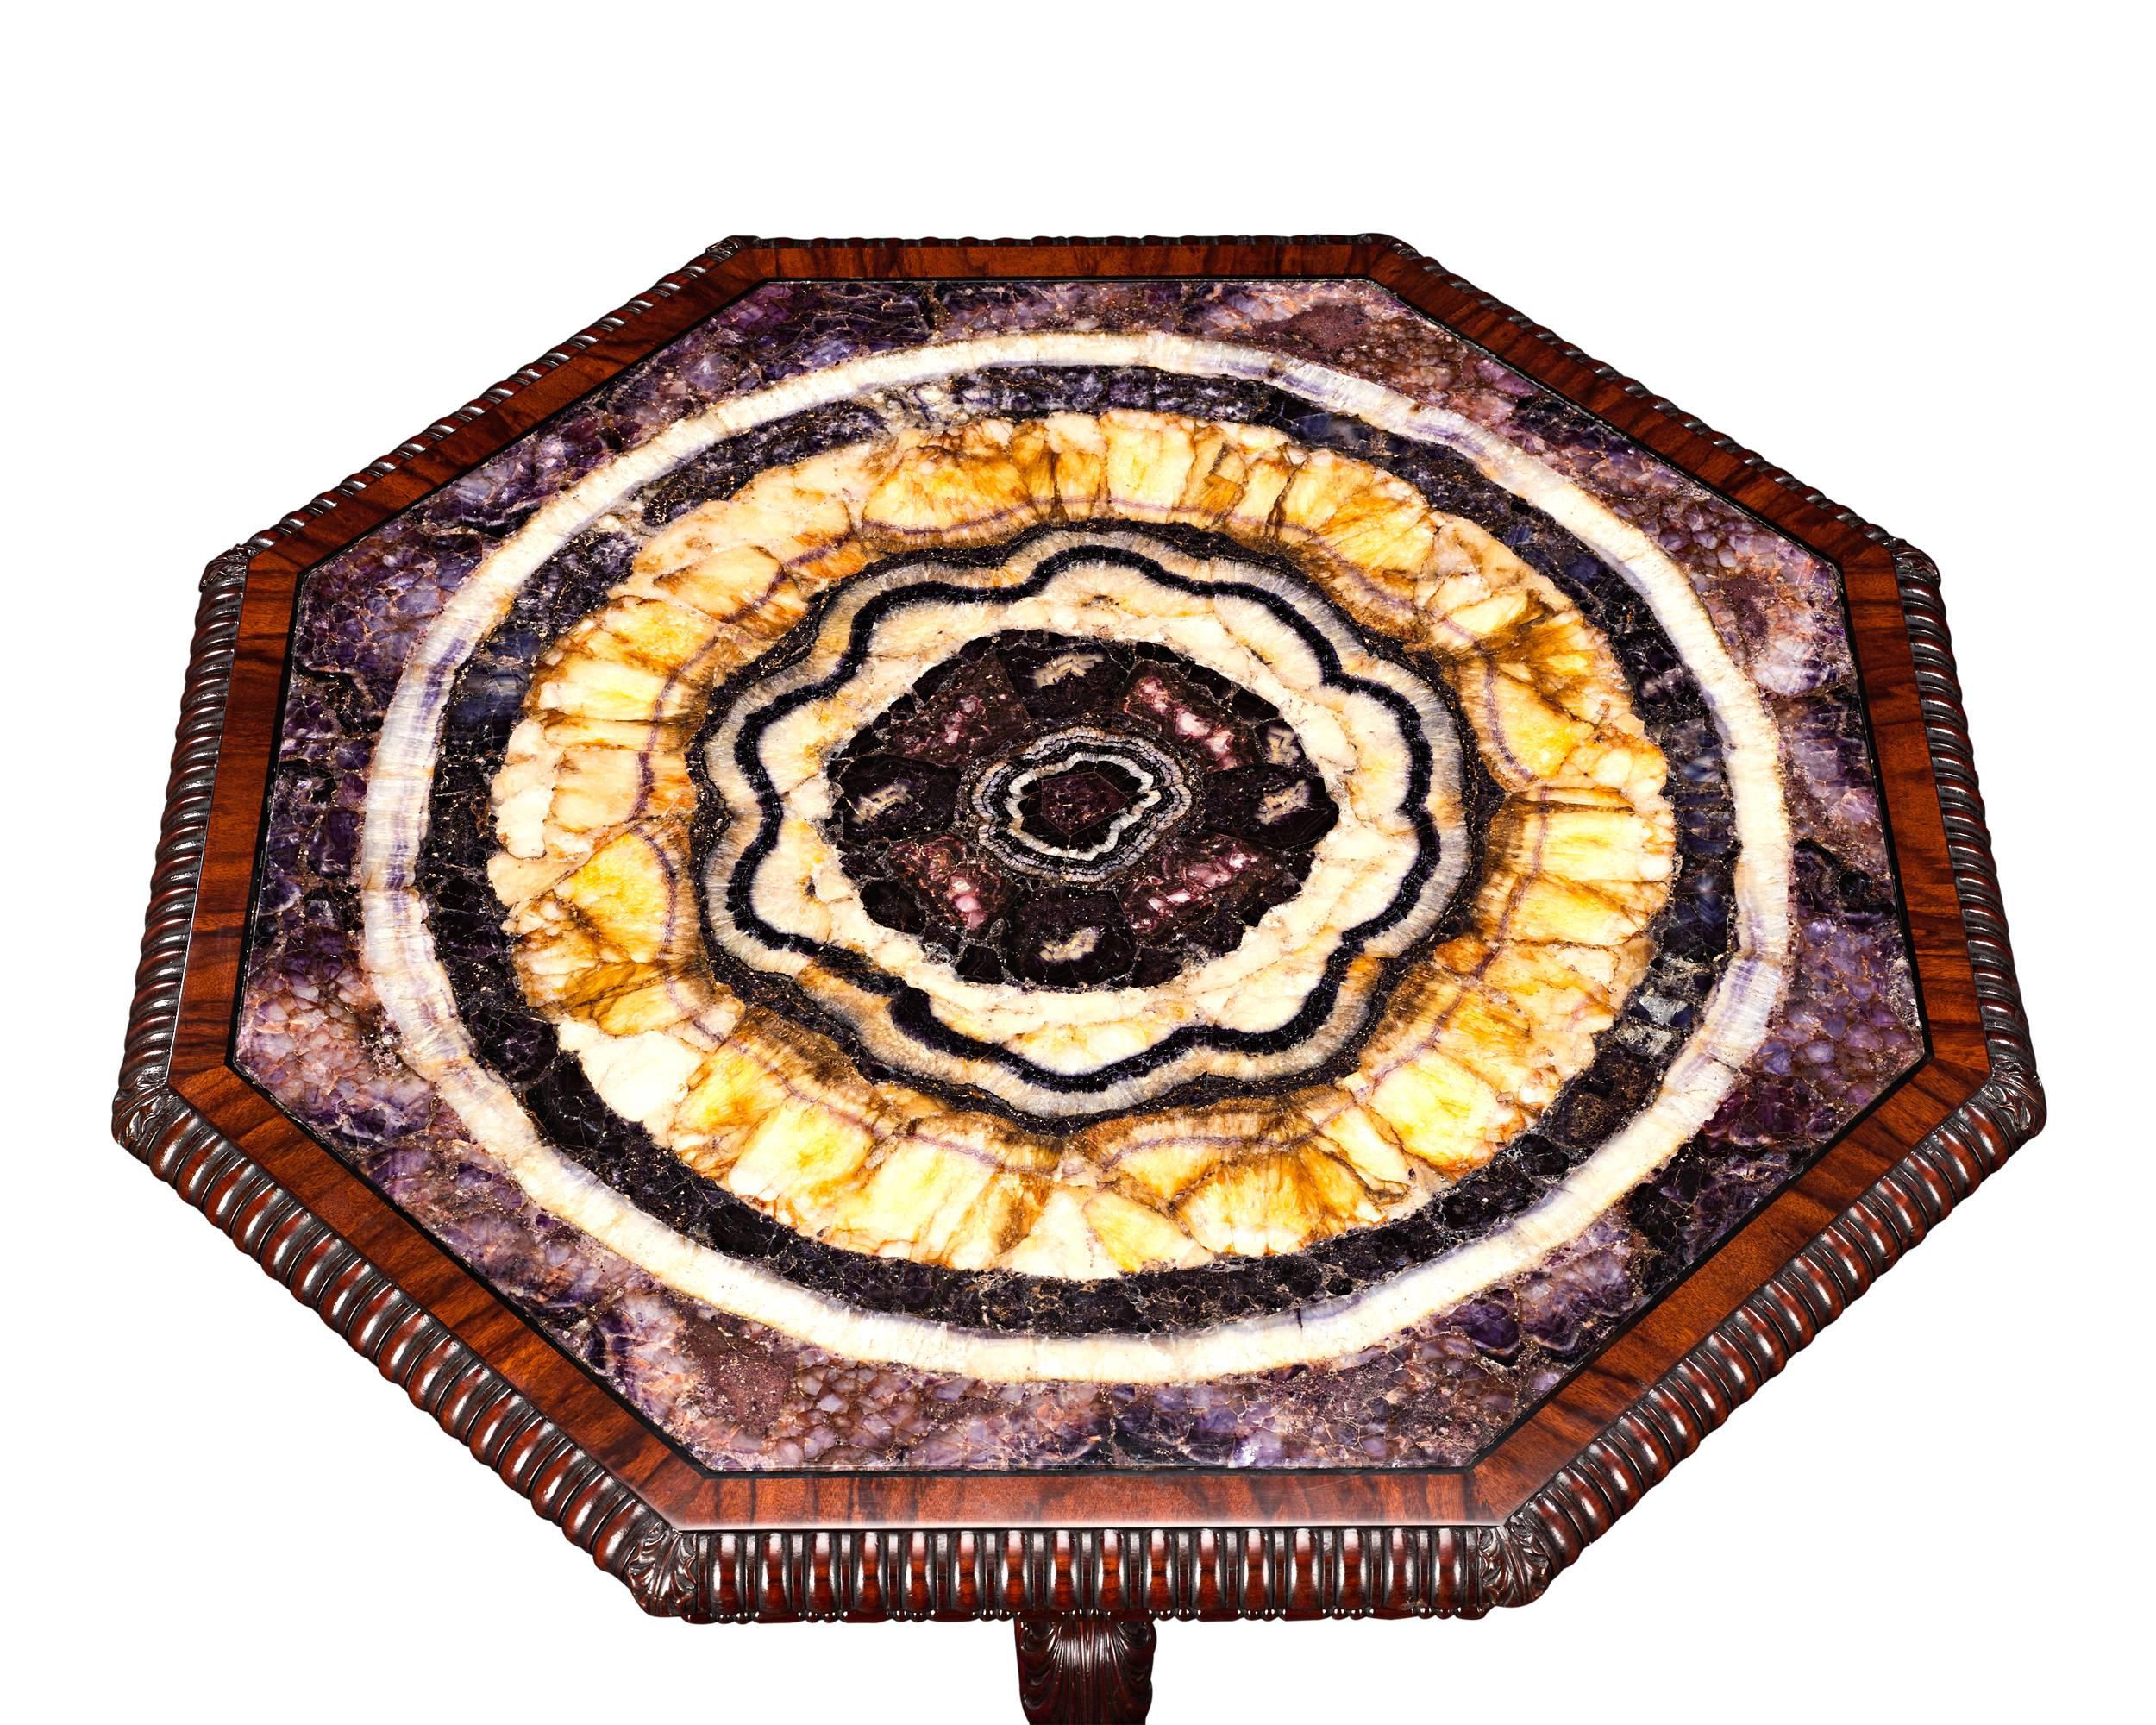 A one-of-a-kind masterpiece, this impressive table is almost certainly the finest piece of blue john furniture ever crafted. The star of the table is undoubtedly the monumental slab of Derbyshire blue john that is set at its center. One of the most